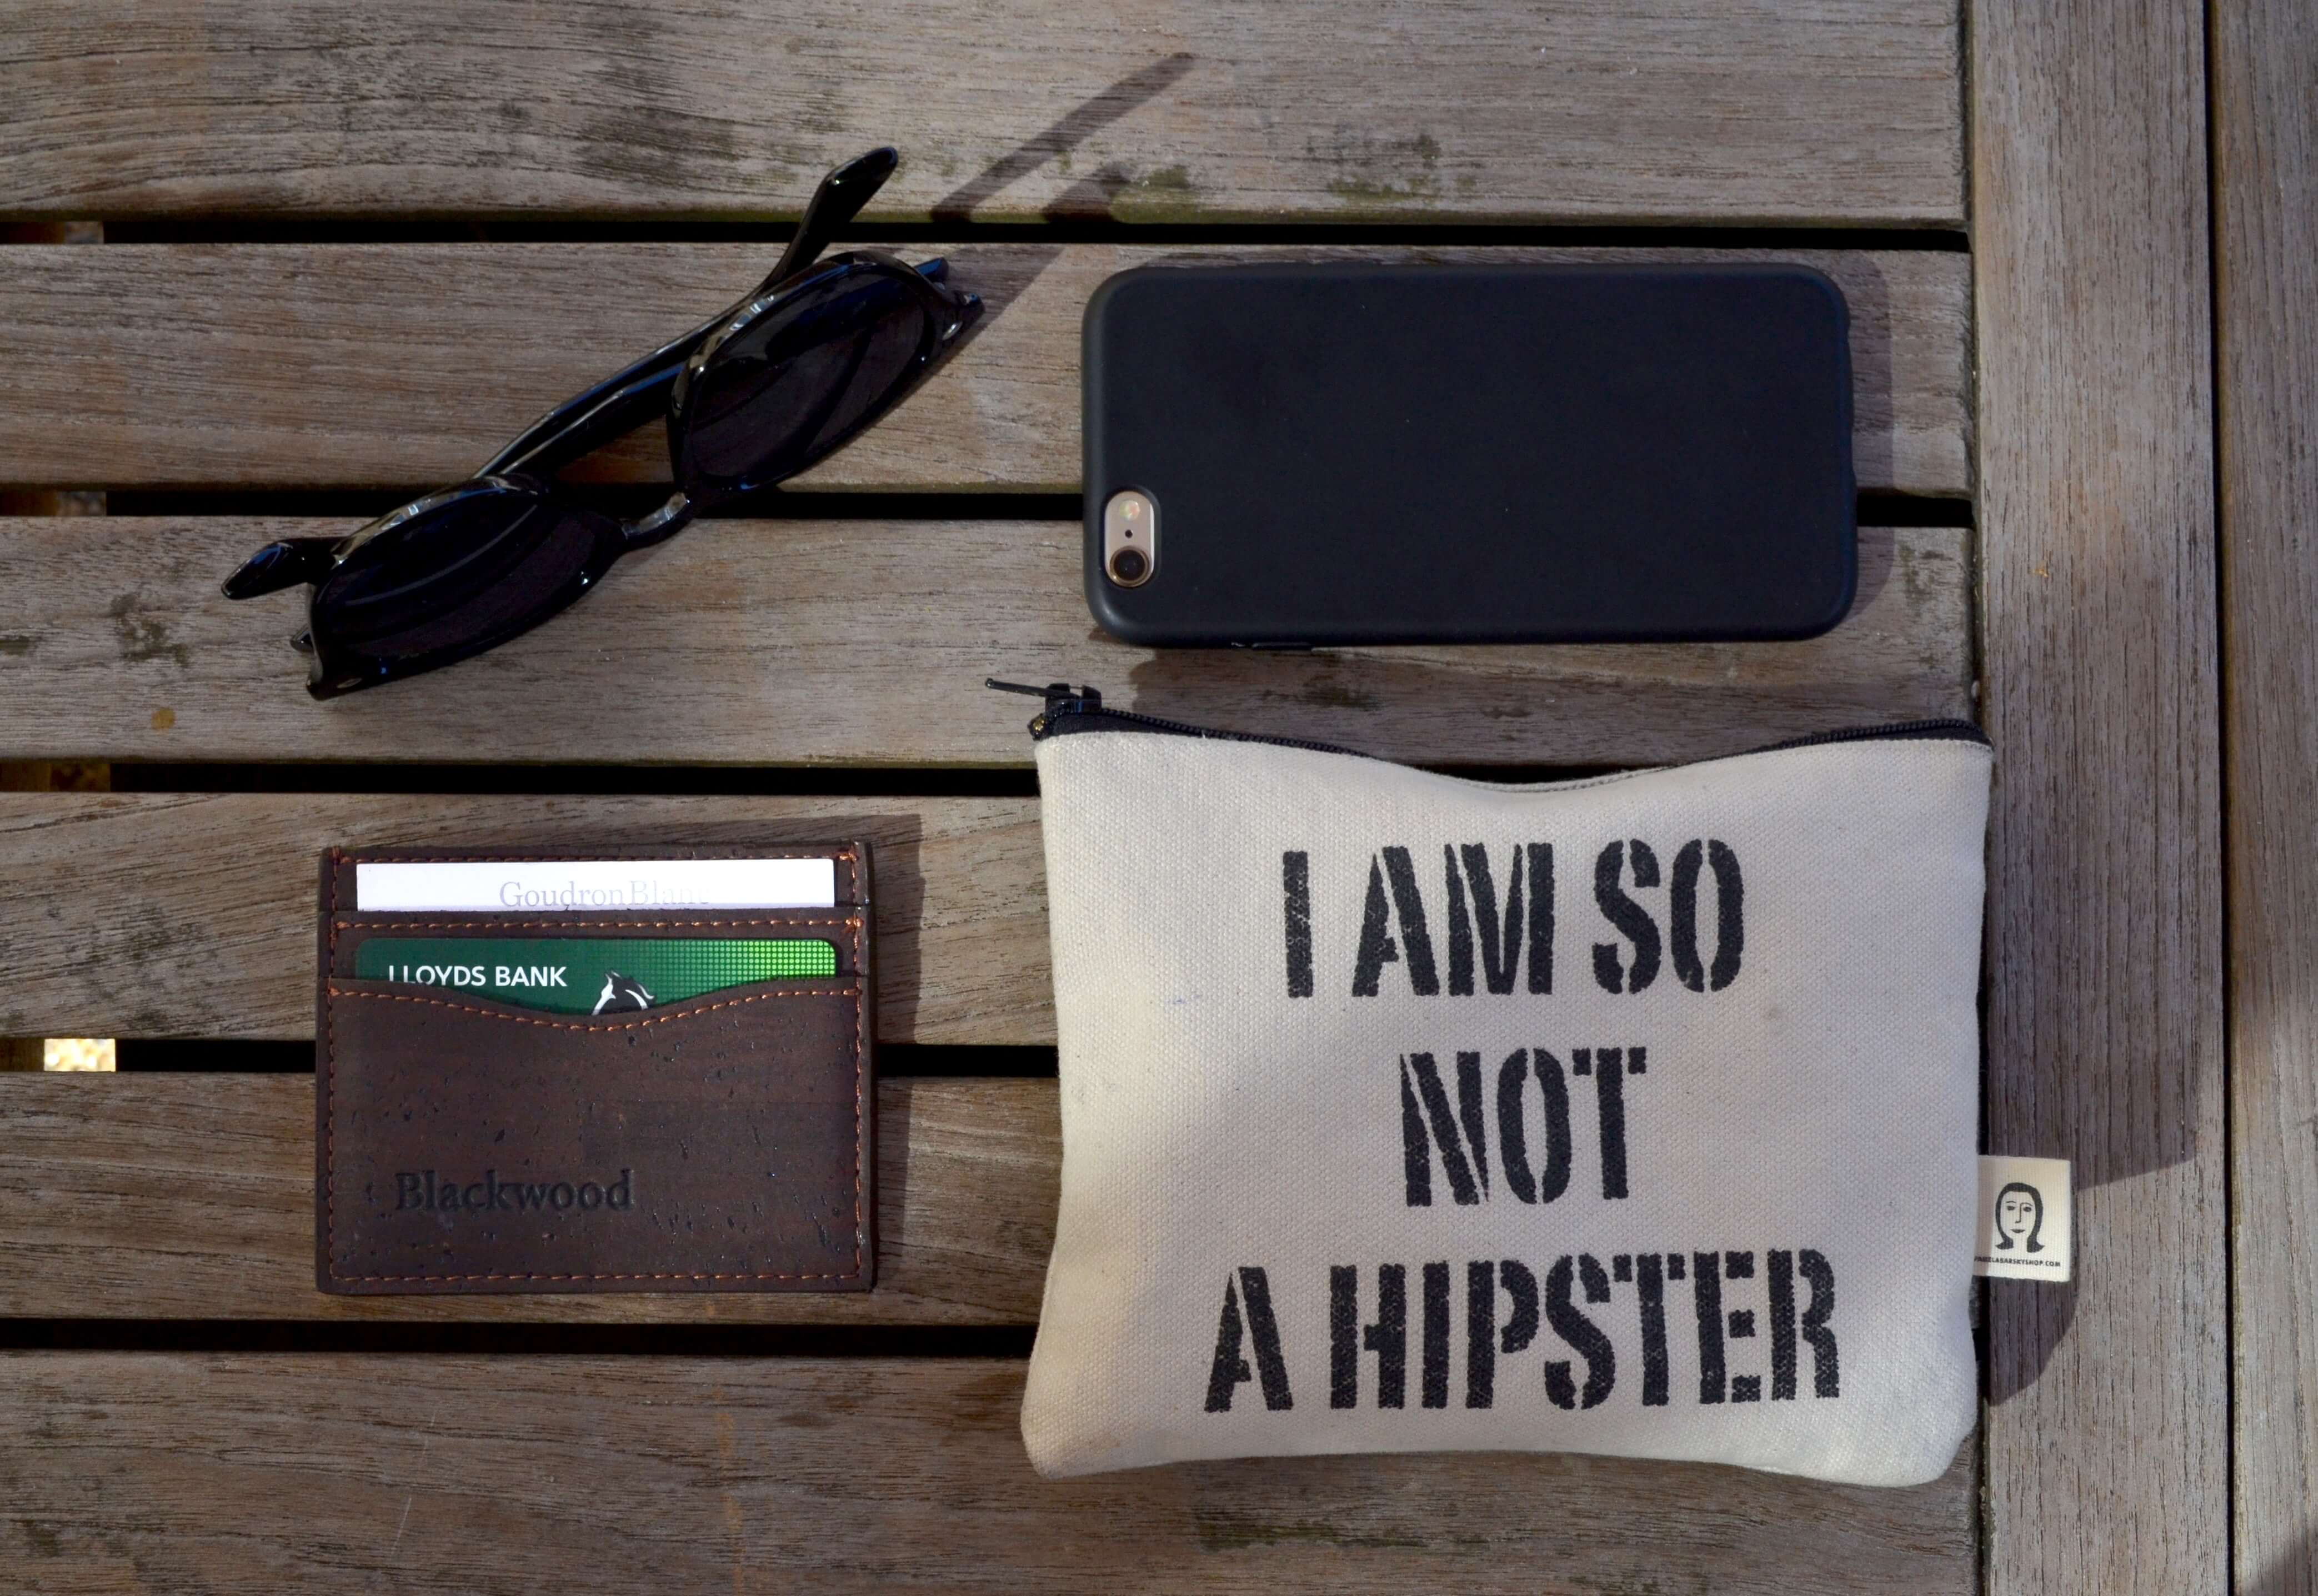 A sunglasses bag with "I AM SO NOT A HIPSTER" printed on it